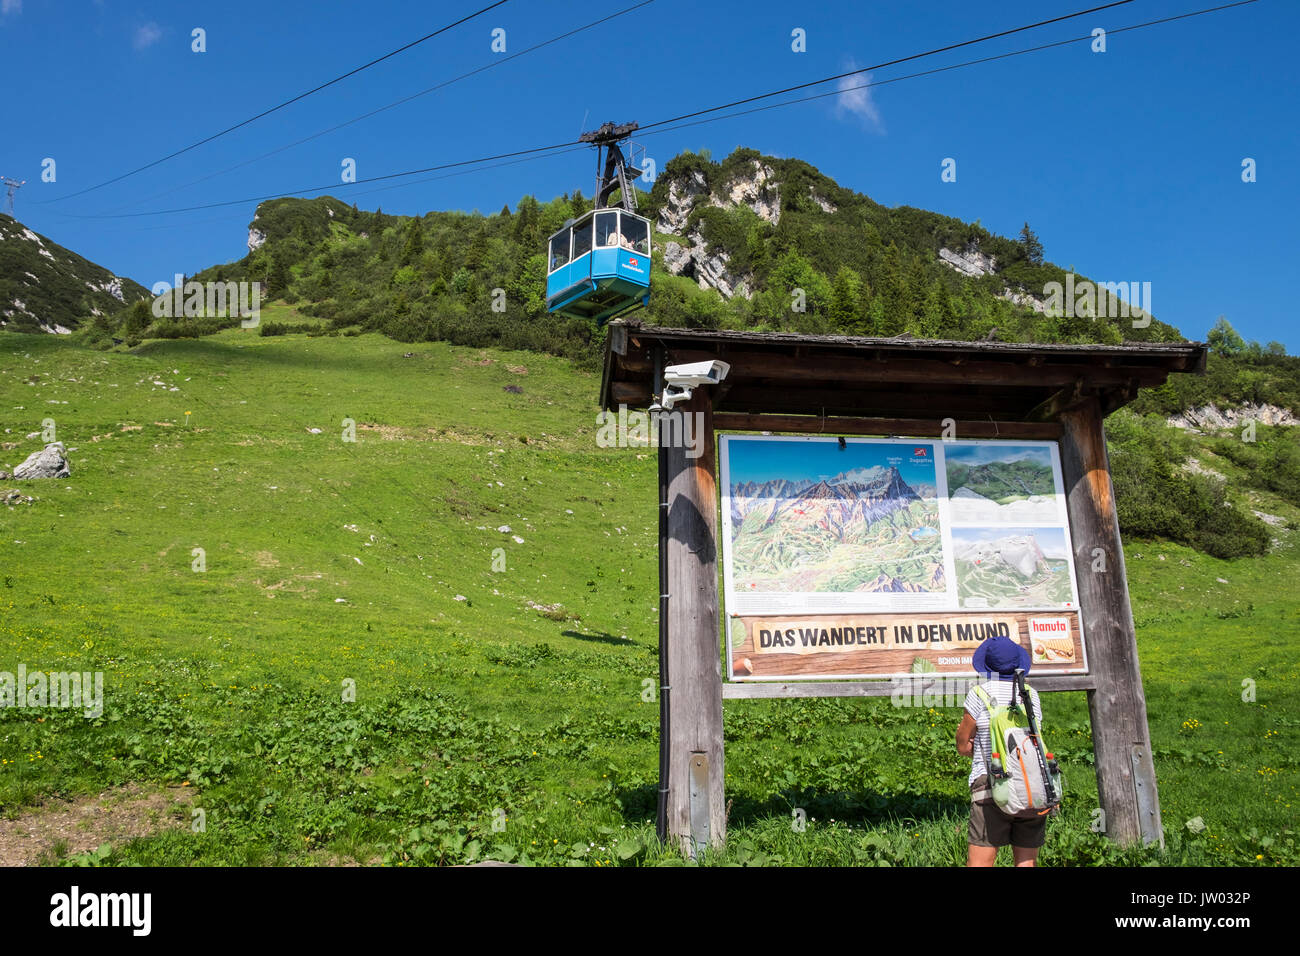 Woman walker reading information panel as Hochalmbahn cable car cabin is coming down the mountain, Hochalm, Kreuzeck, Zugspitzland, Bavaria, Germany Stock Photo